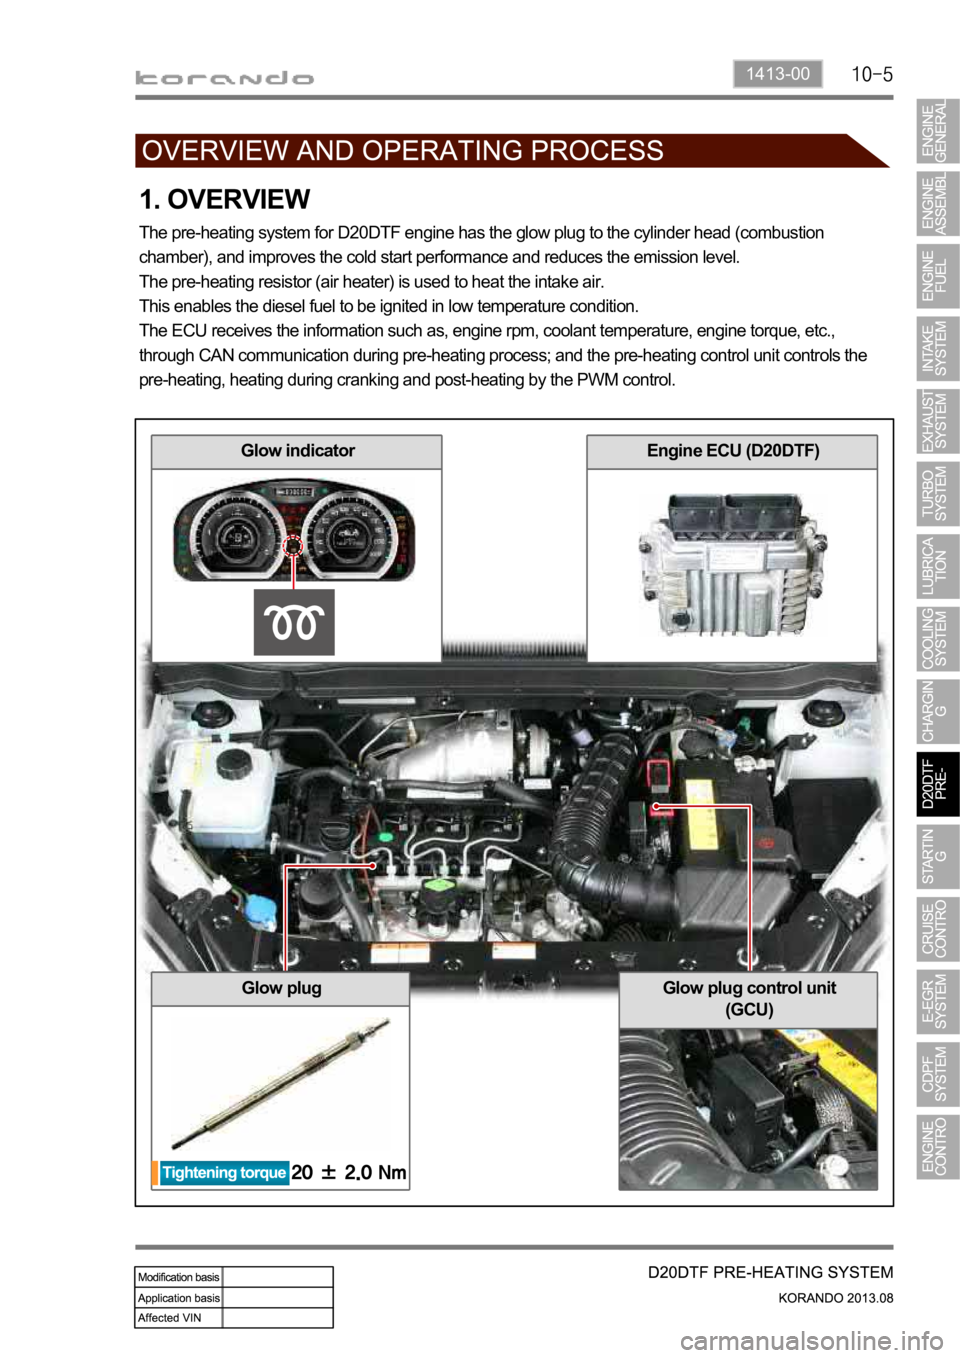 SSANGYONG KORANDO 2013  Service Manual 1413-00
1. OVERVIEW
The pre-heating system for D20DTF engine has the glow plug to the cylinder head (combustion 
chamber), and improves the cold start performance and reduces the emission level.
The p